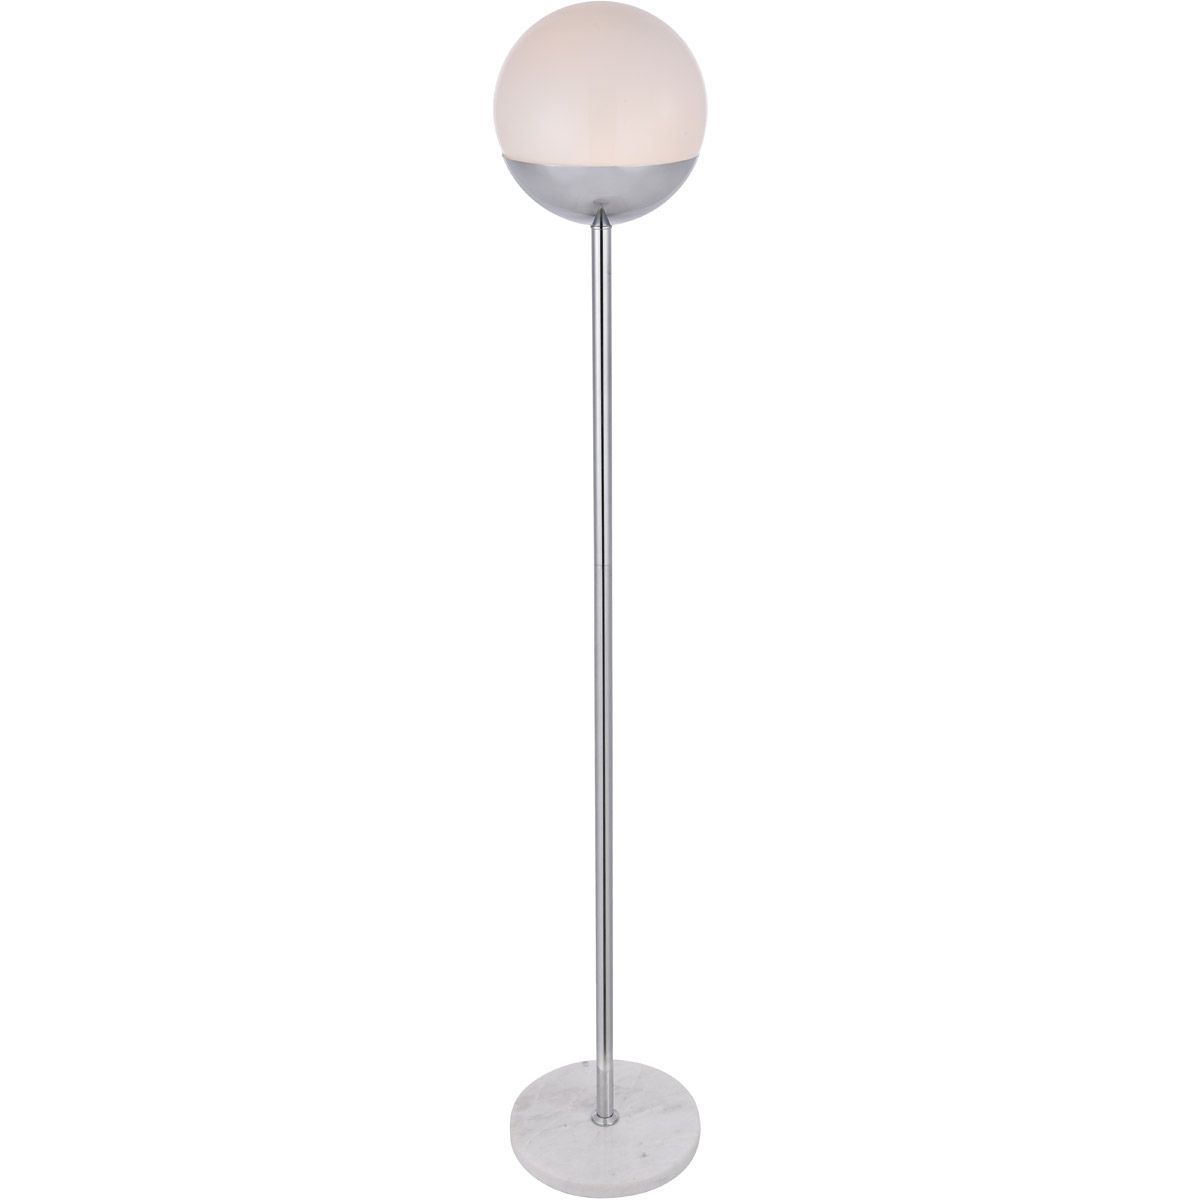 Chrome Finish Metal Floor Lamps For Popular Floor Lamps 1 Light Fixtures With Chrome Finish Metal/glass/marble Material  E26 Bulb 11" 40 Watts – Walmart (View 7 of 15)